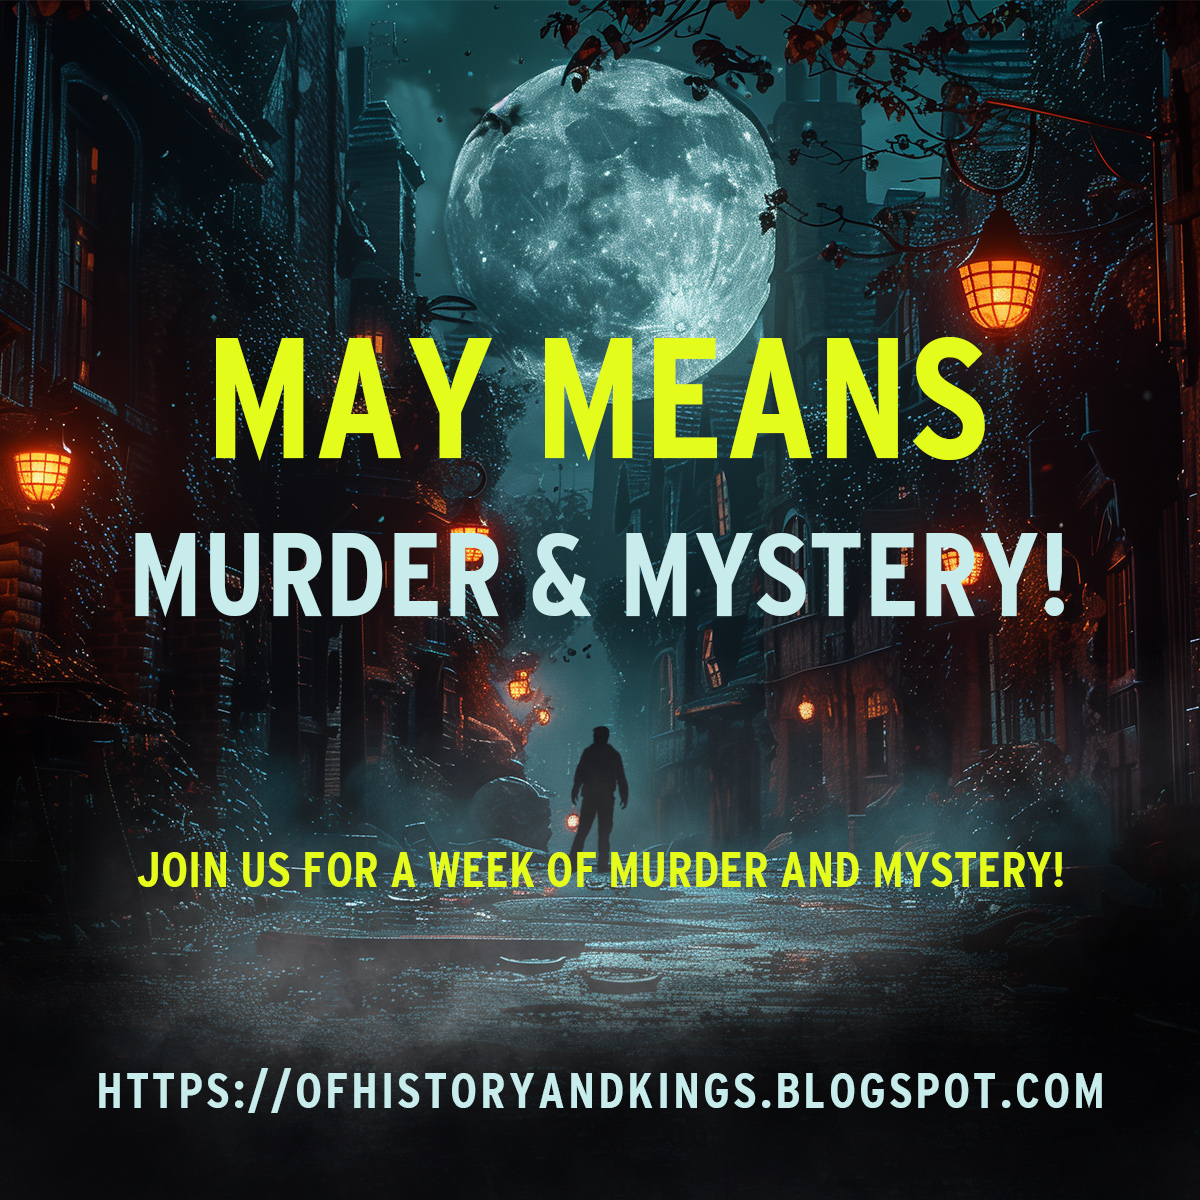 Last in my MYSTERY WEEK #BlogTour: join @LucienneWrite on why, how, where and when #MysteryWriters immerse ourselves in writing murderous mysteries!  #CosyMystery #Blog #BookPromo #GoodWriters #GoodReads ofhistoryandkings.blogspot.com